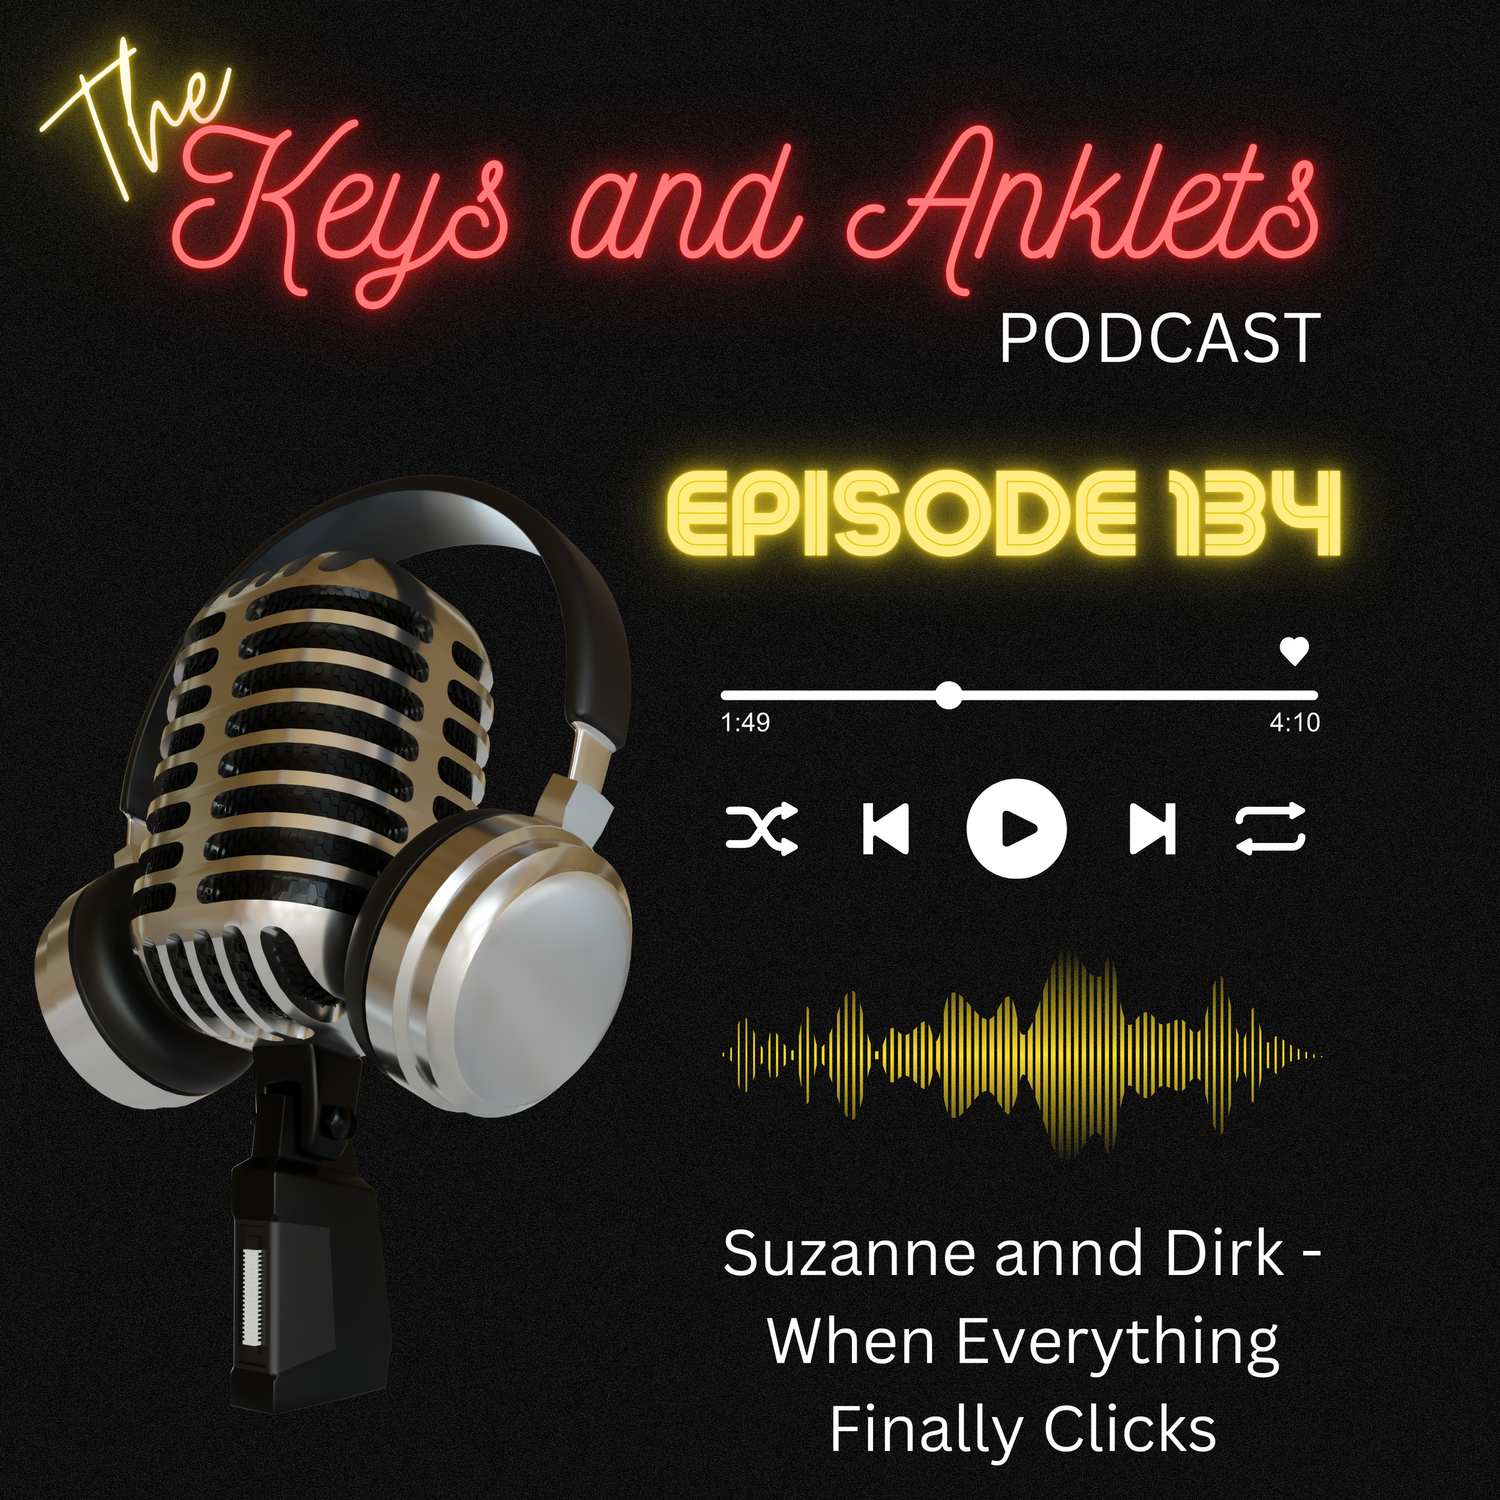 Episode 134 Suzanne and Dirk - When everything finally clicks